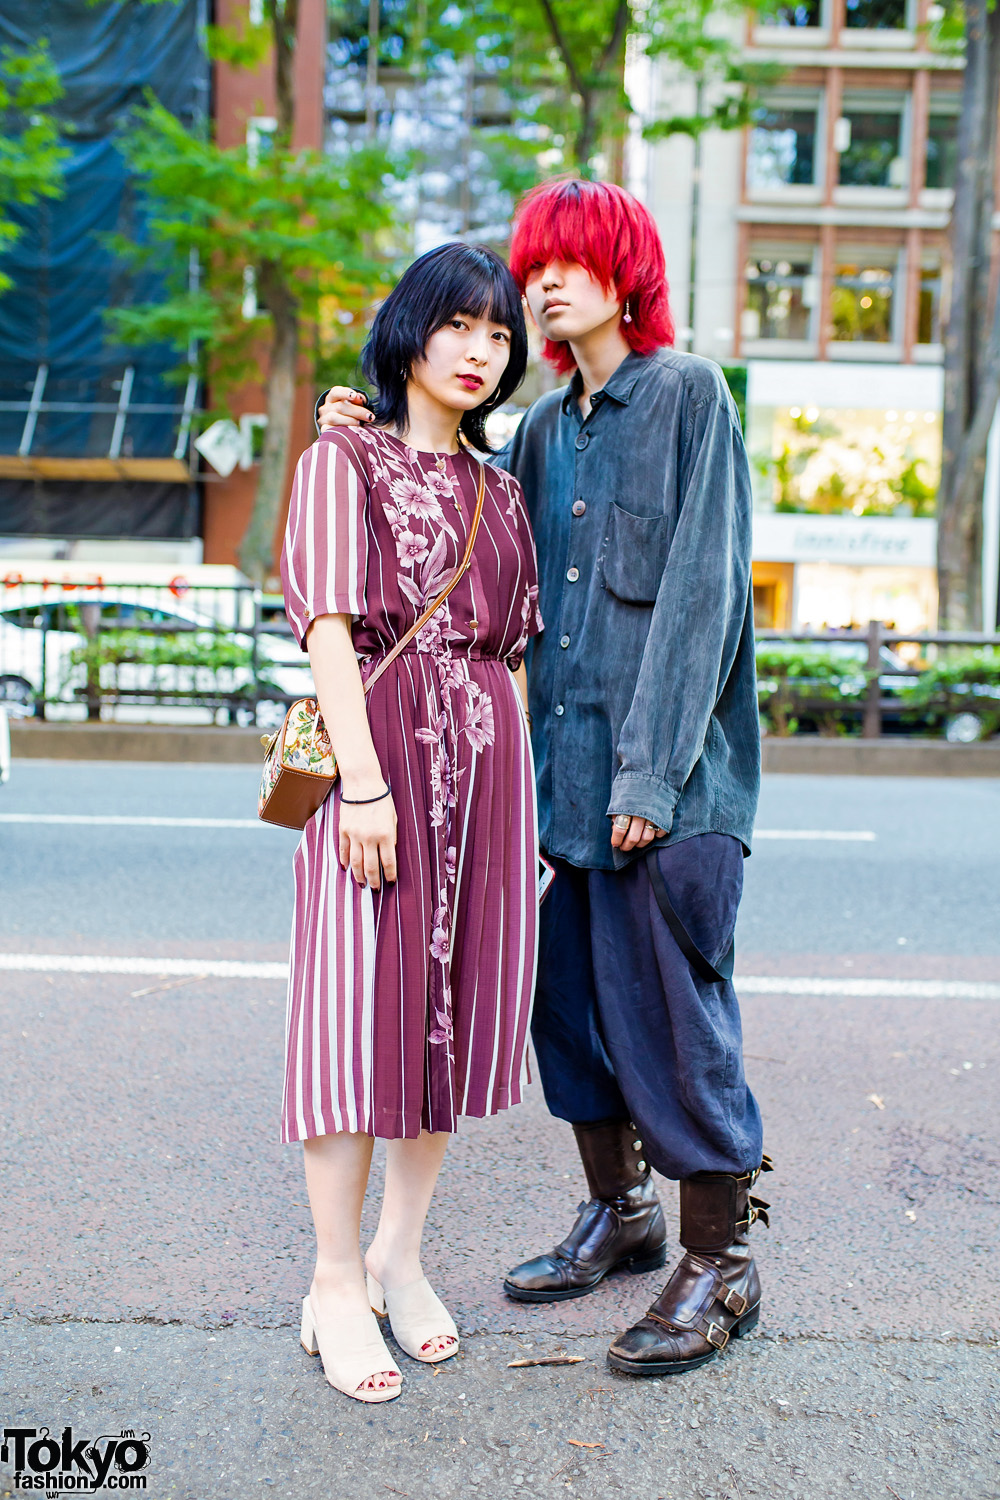 Japanese Teen Duo's Street Styles w/ Red Hair, Rosy Baroque Dress, Comme Des Garcons Shirt, Vintage Suspender Pants, Slip-Ons & Saint Laurent Rive Gauche Boots